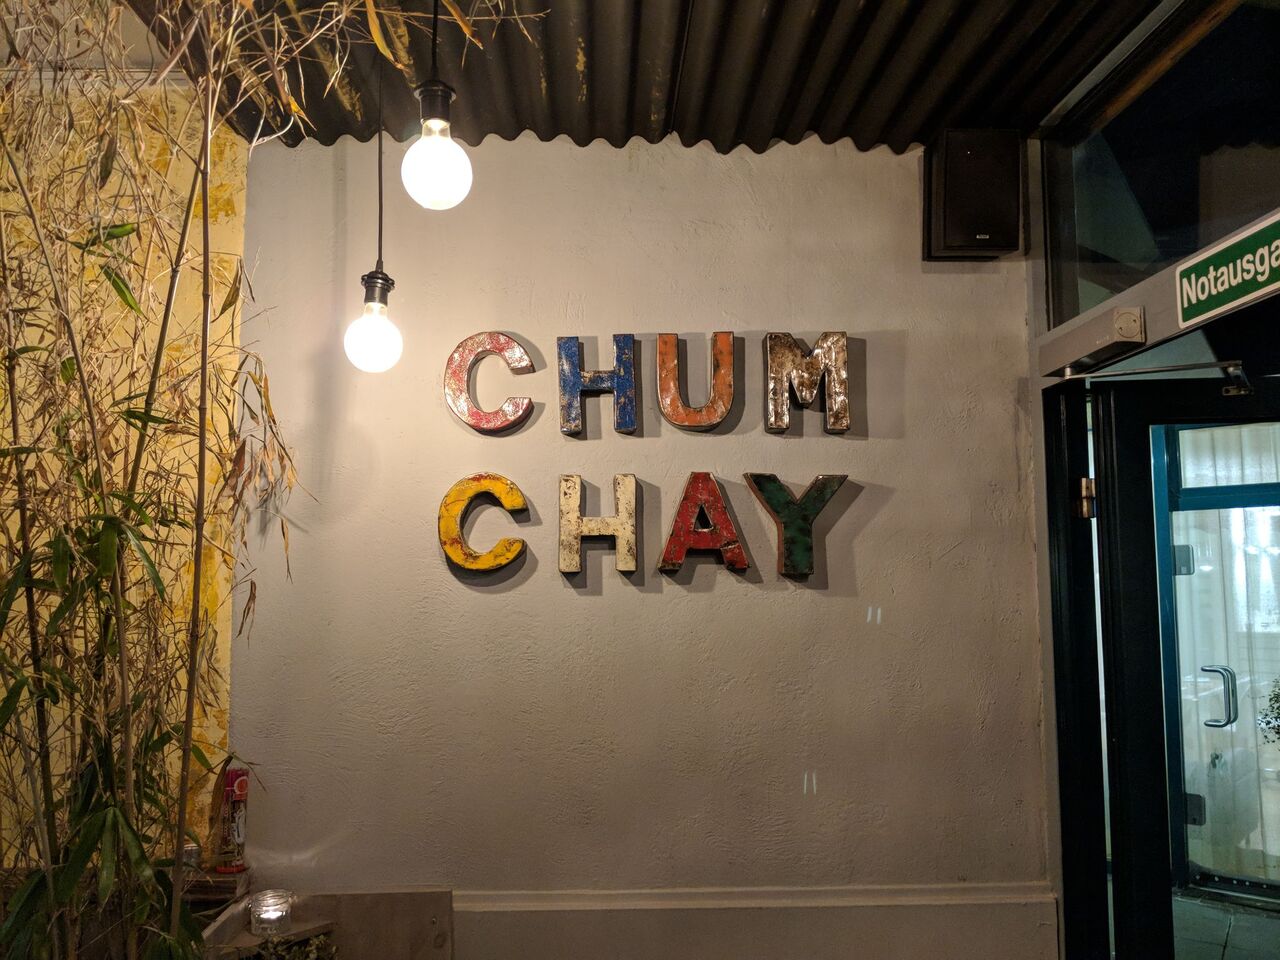 A photo of Chum Chay